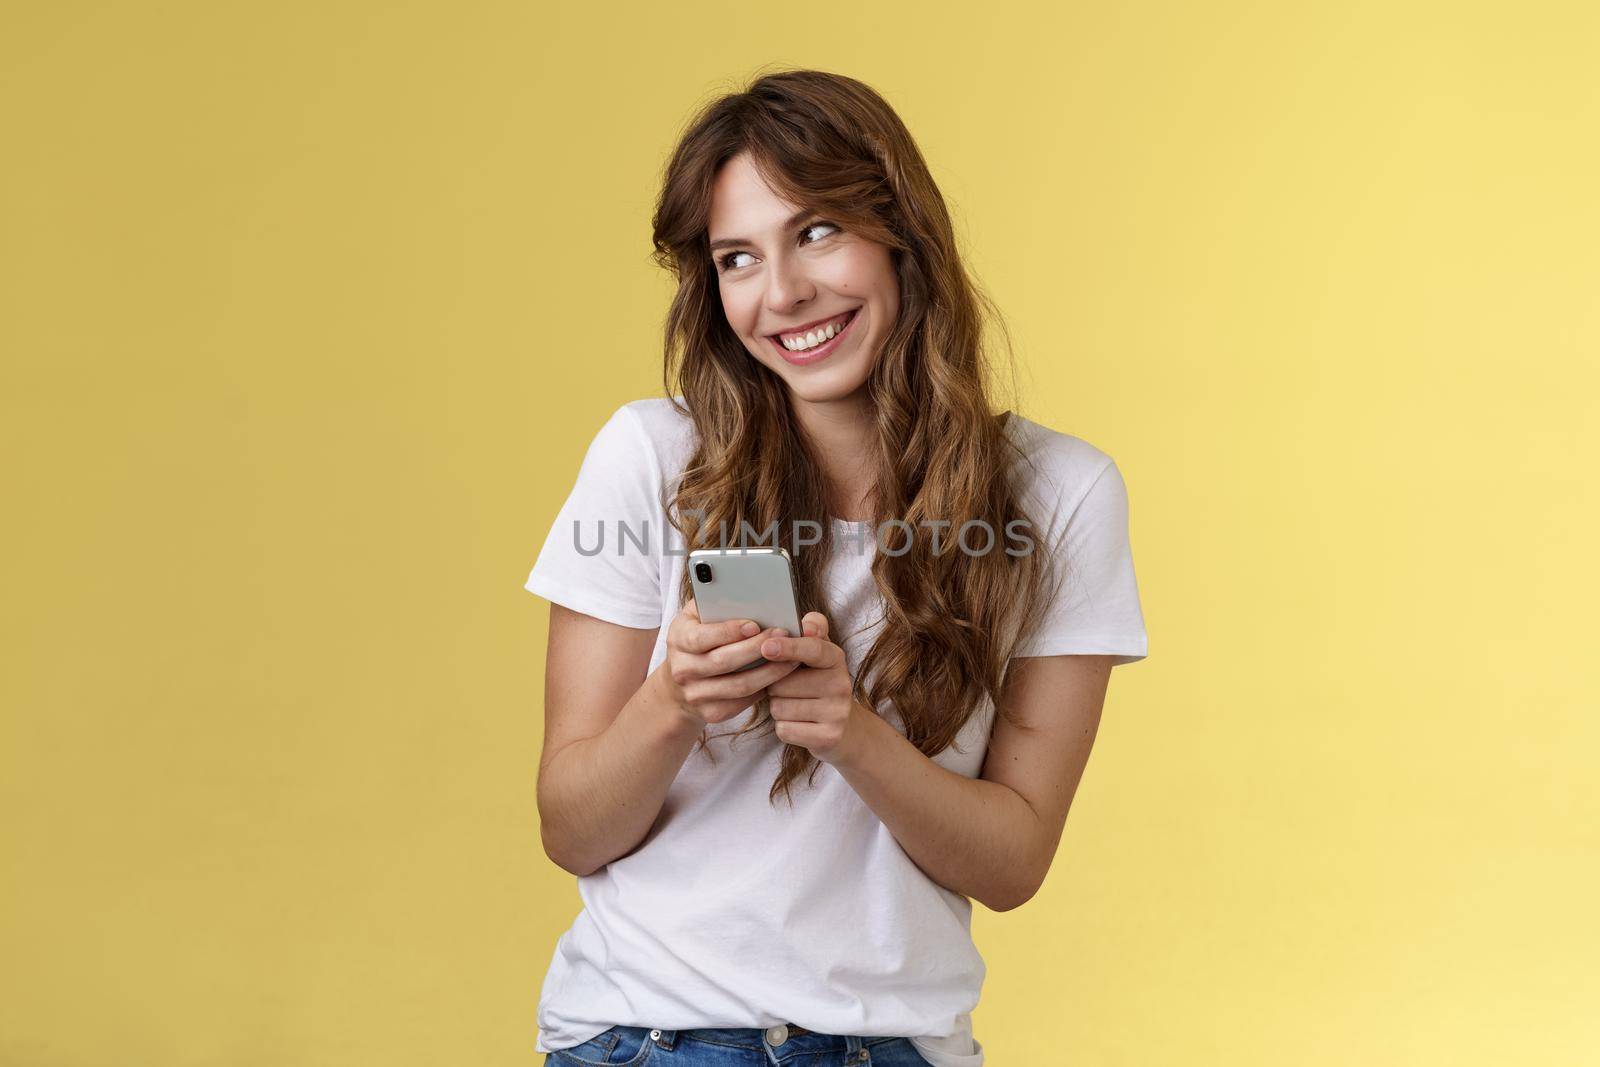 Lovely silly cute flirty girl texting receive romantic lovely gesture look away blushing modest smiling broadly reading bold passionate message stand yellow background joyfully send boyfriend photo. Lifestyle.